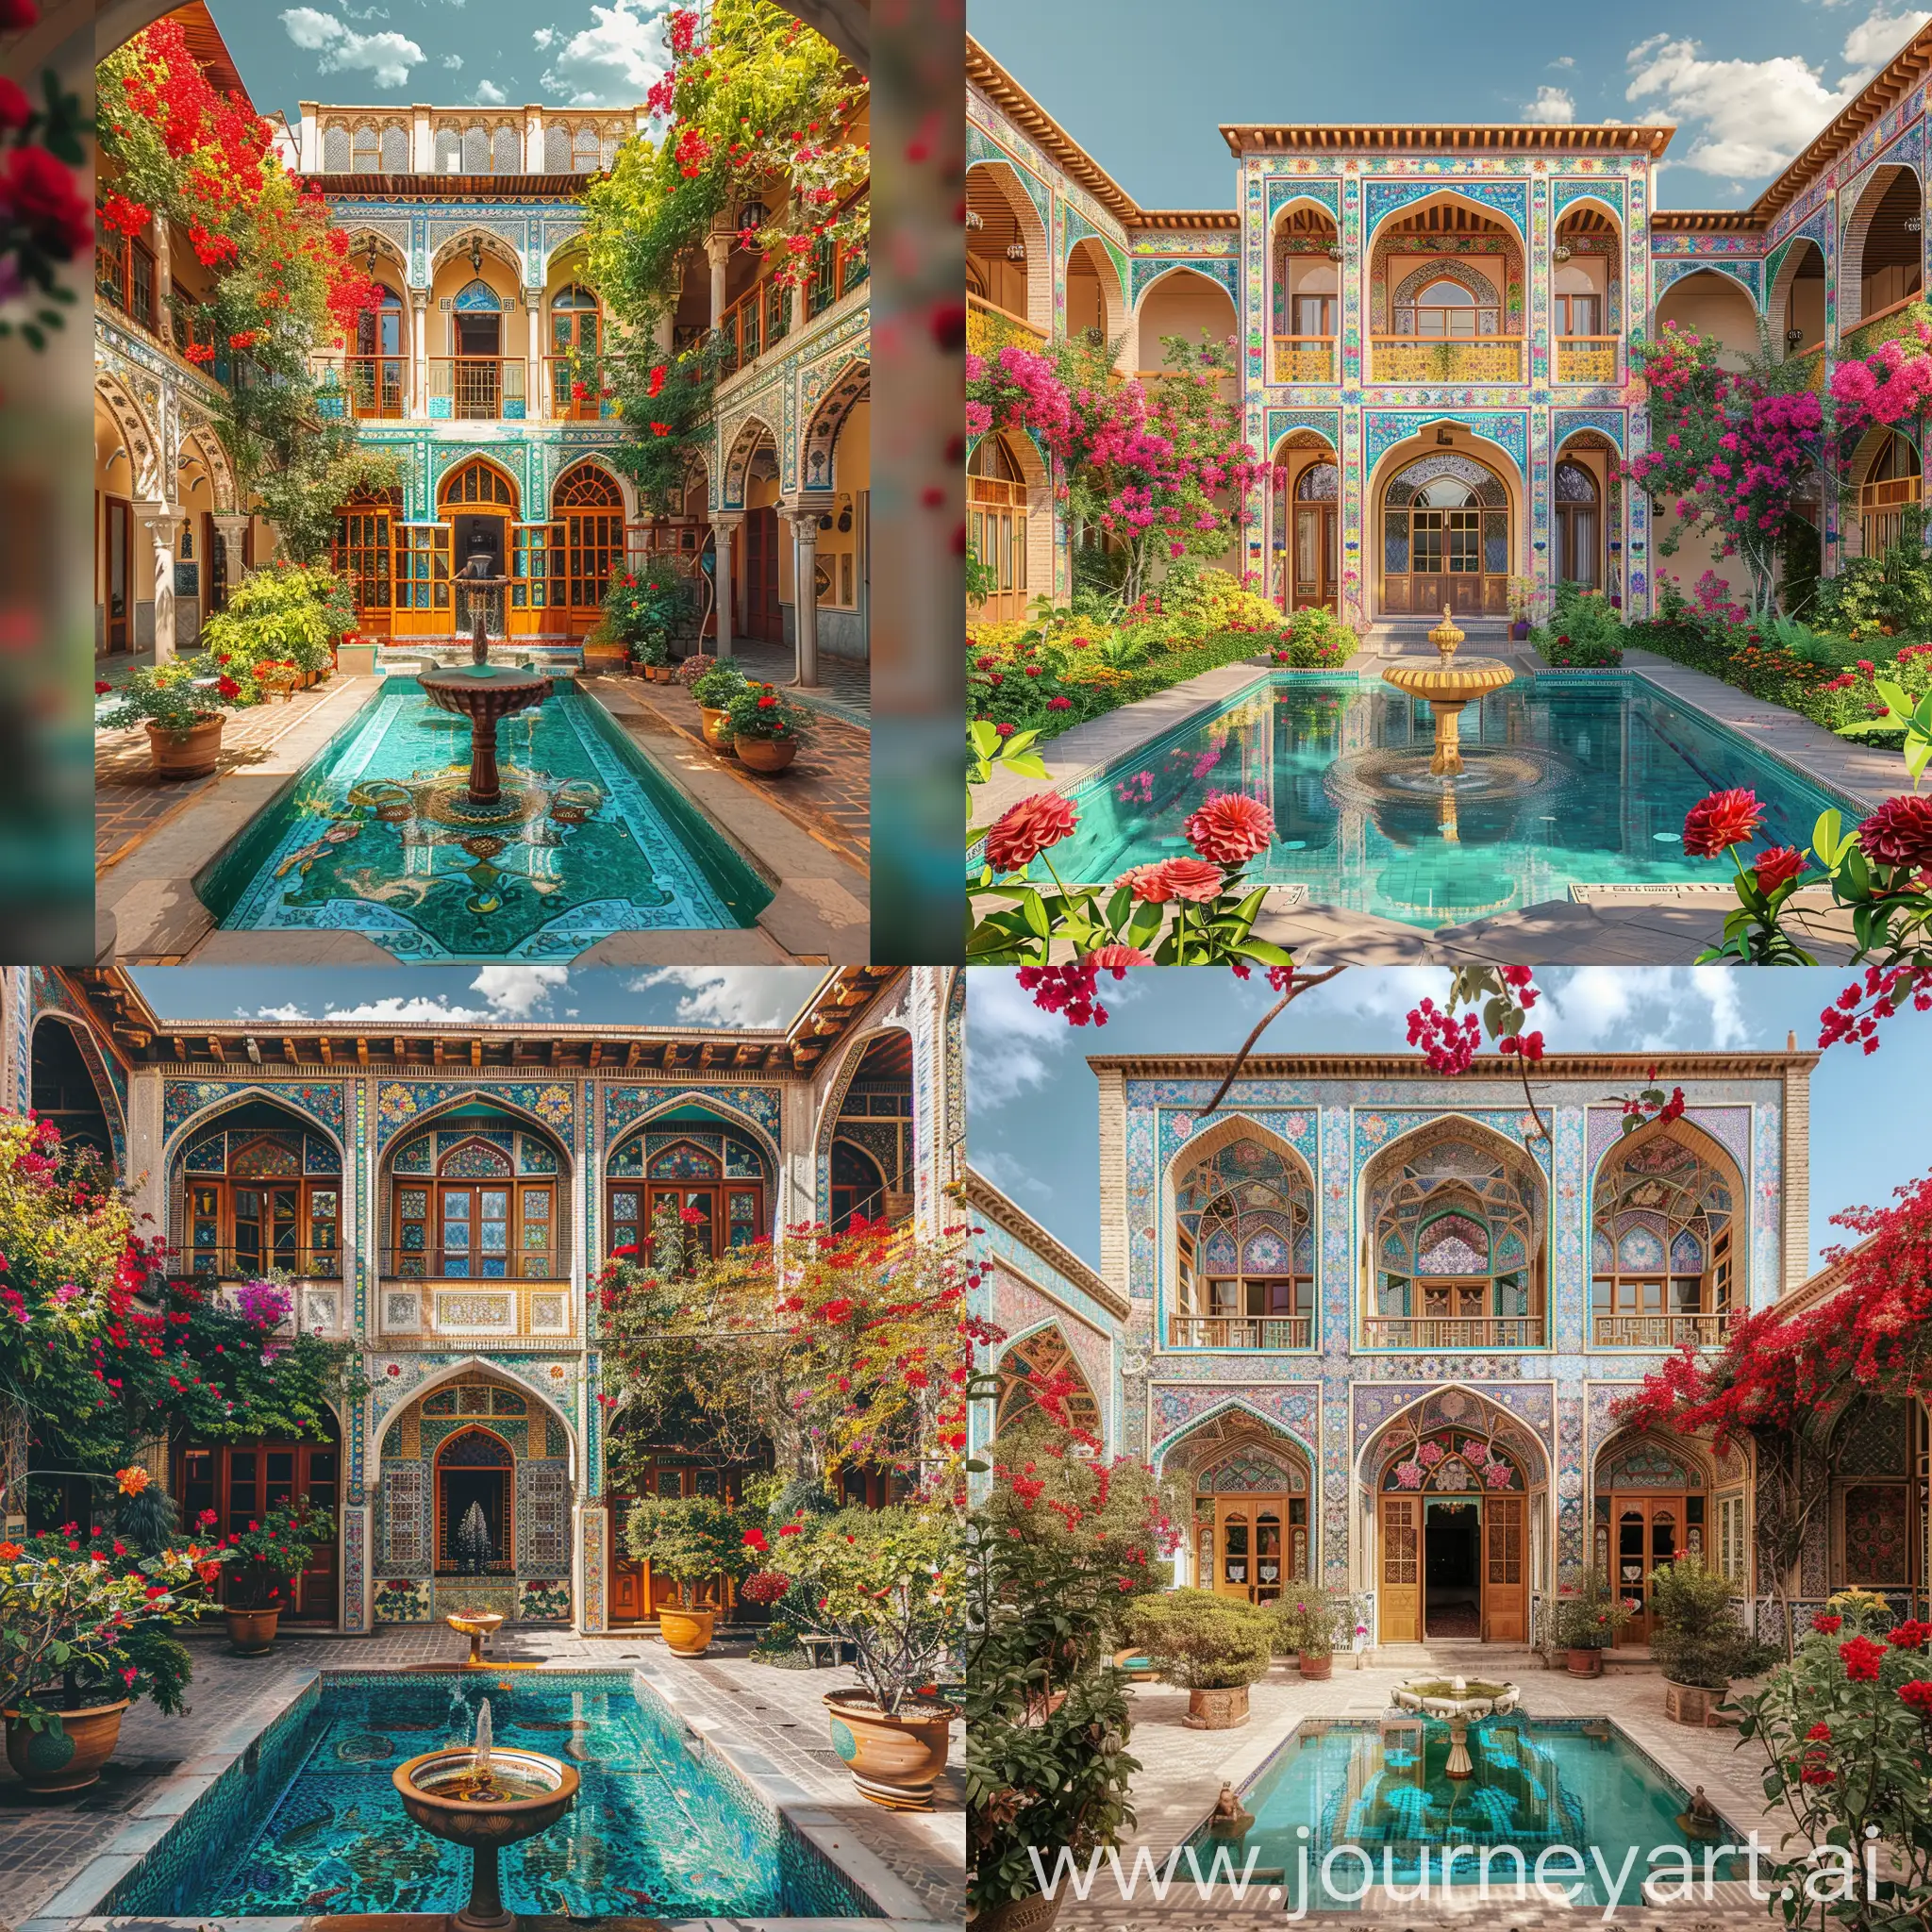 Traditional-Persian-House-with-Central-Yard-Hanging-Bushes-Red-Flowers-and-Fountain